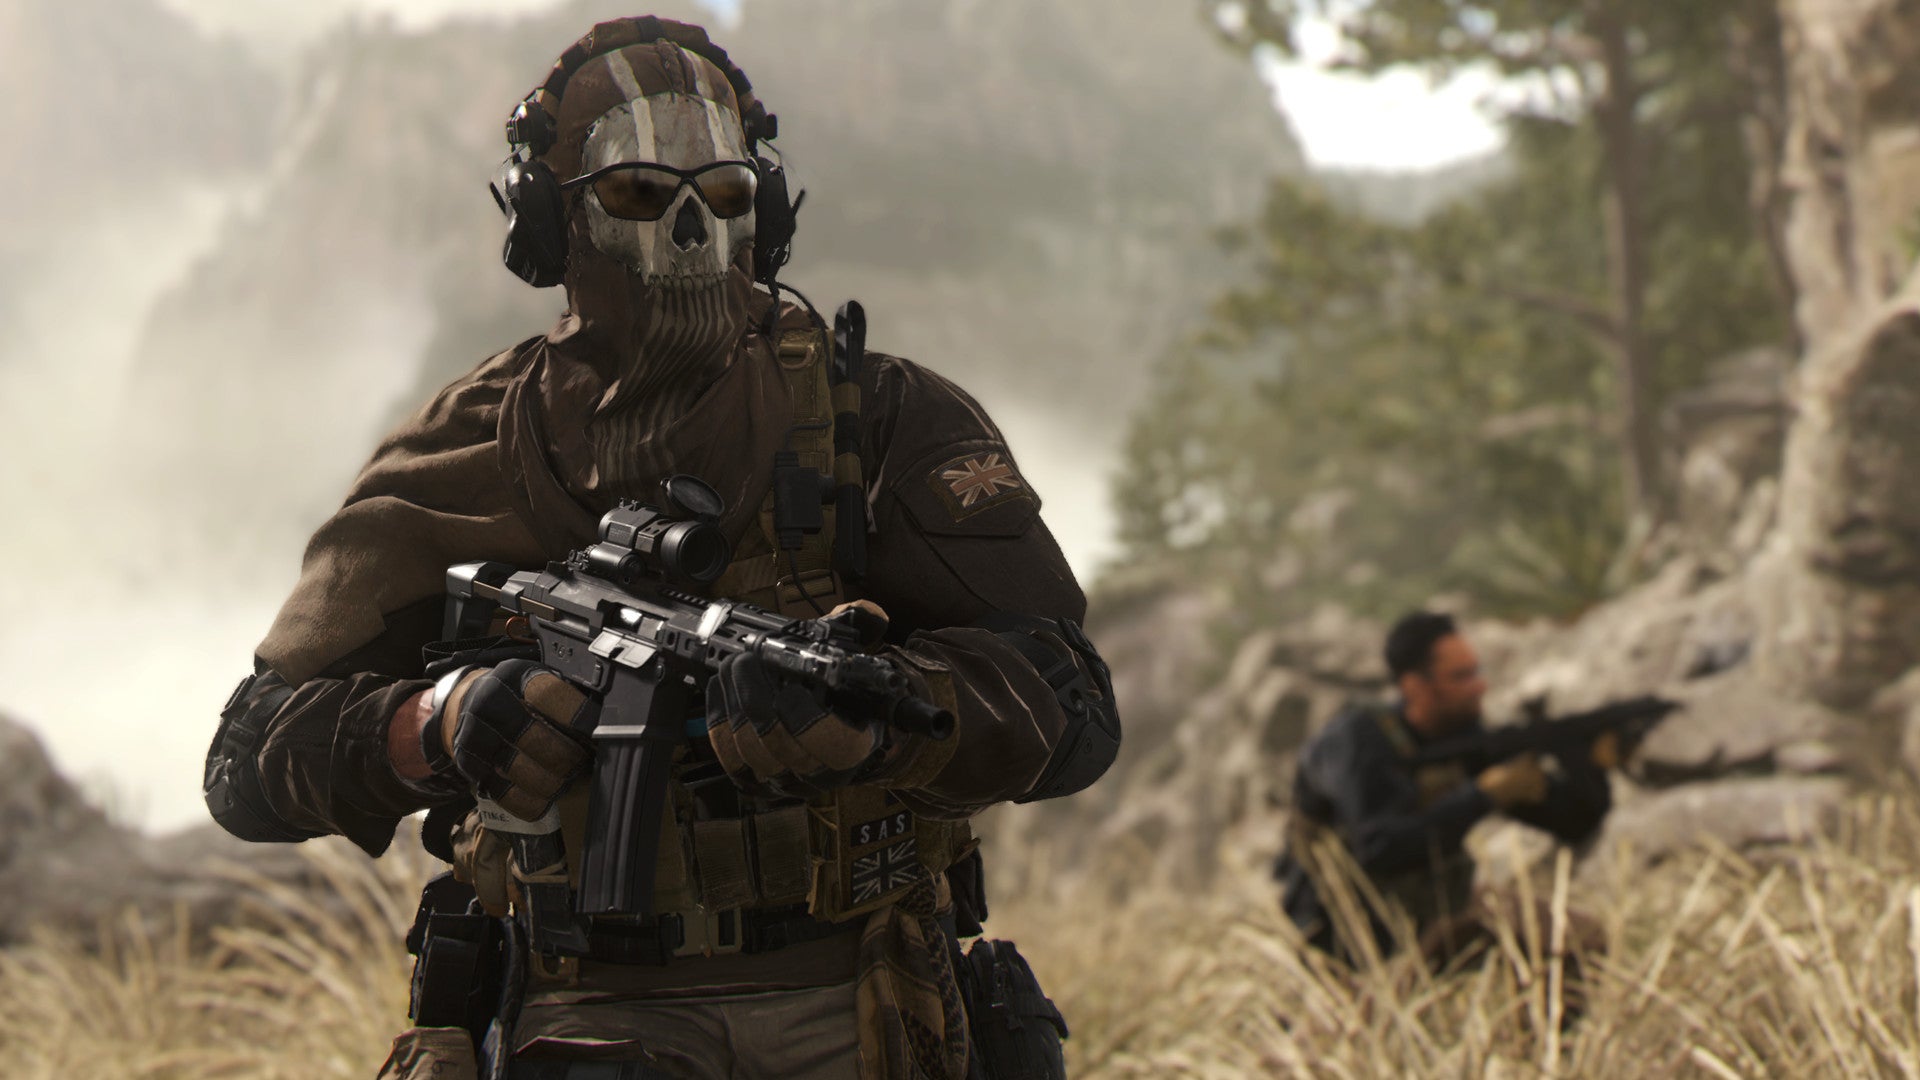 Image for Call of Duty Xbox exclusivity "wouldn't be profitable", Microsoft says